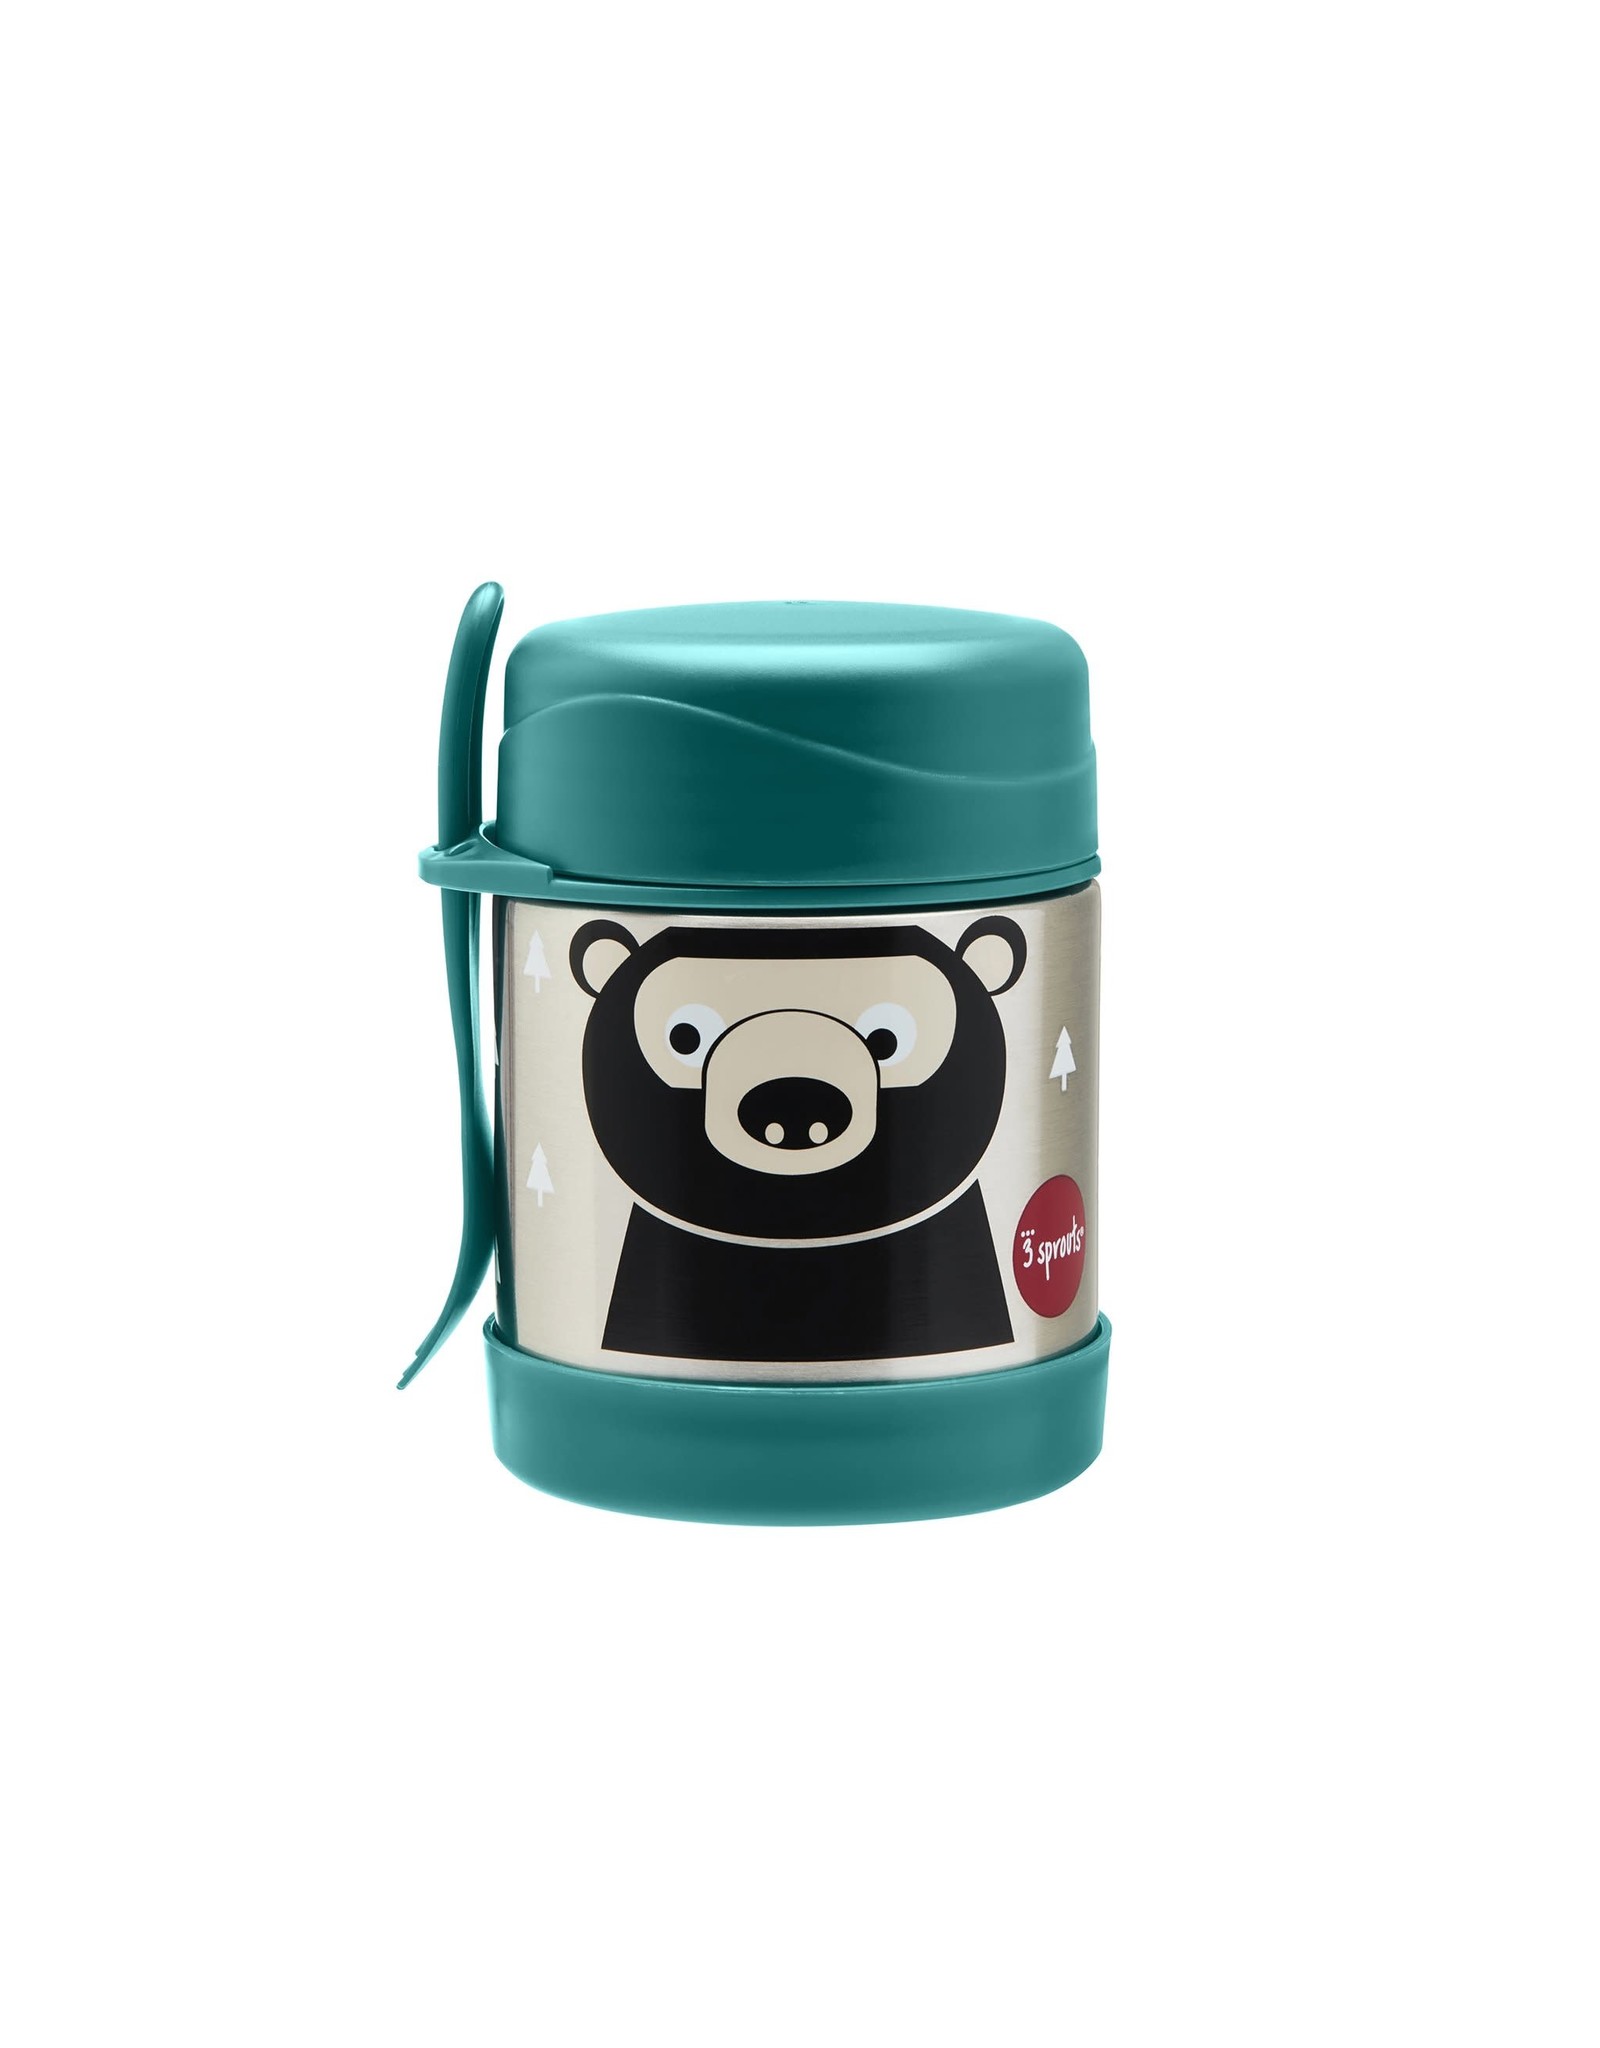 3 Sprouts Stainless Steel Food Jar Teal Bear